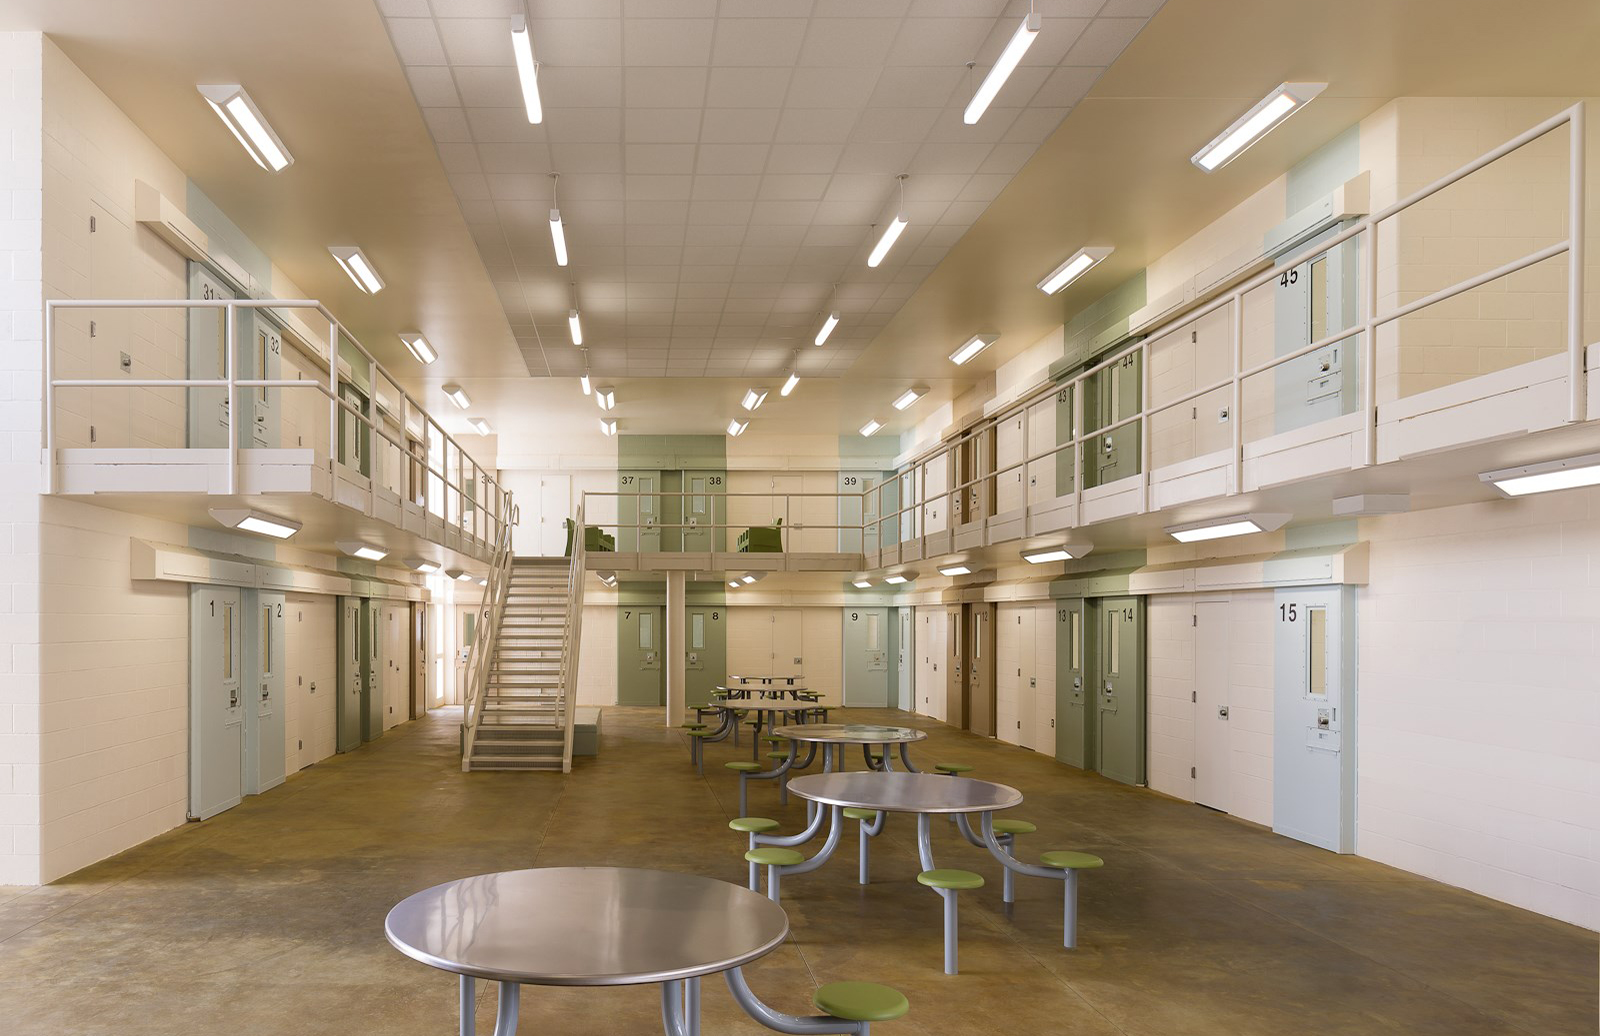 Prison architecture, Back to the Future locations and more from across